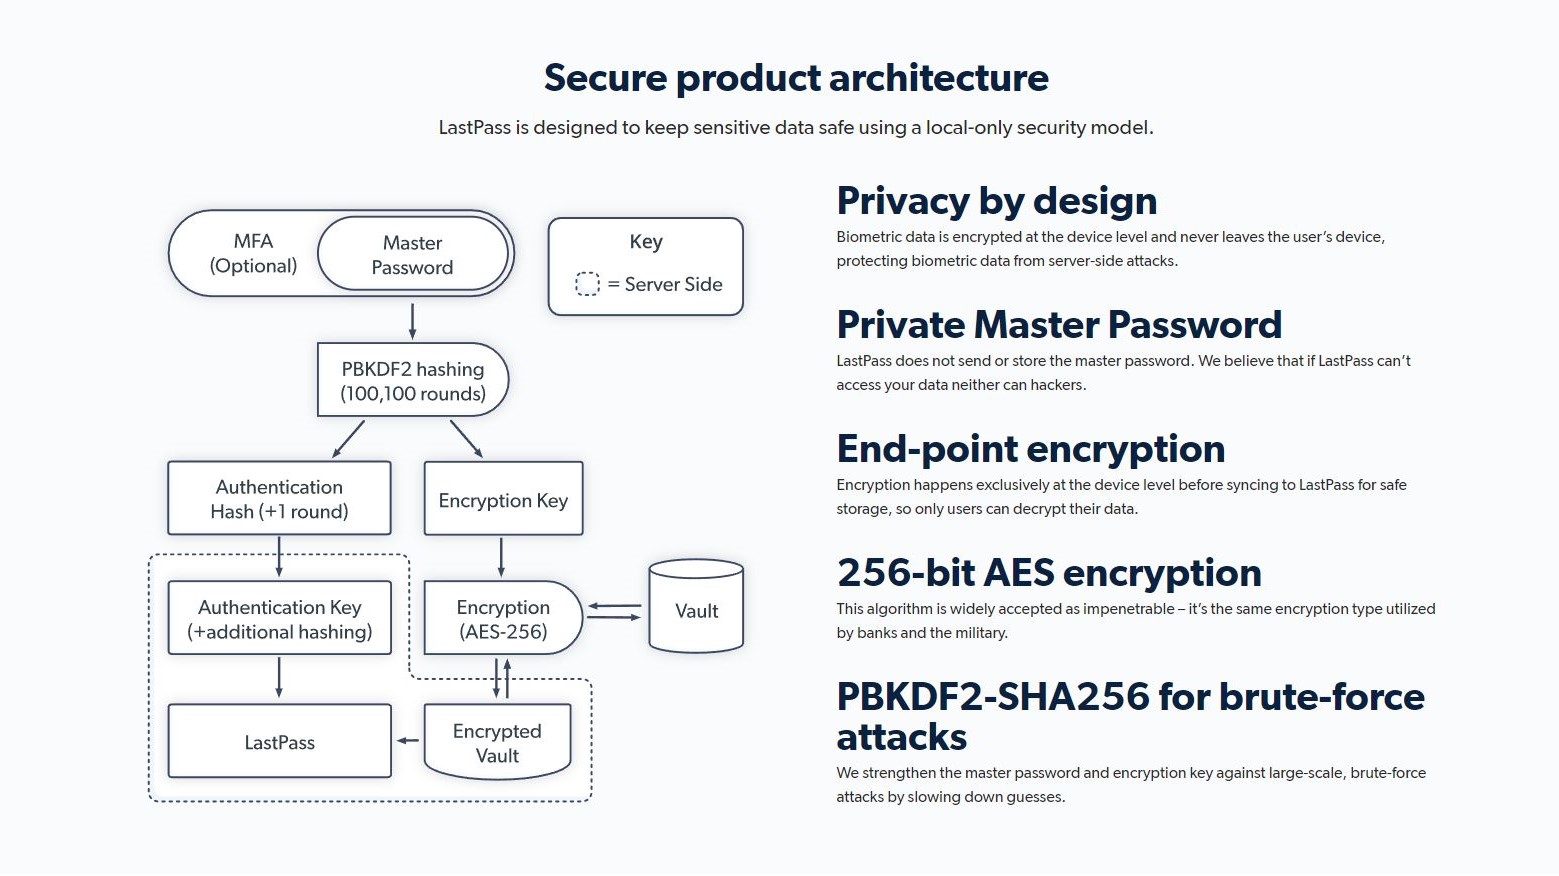 Secure Product Architecture